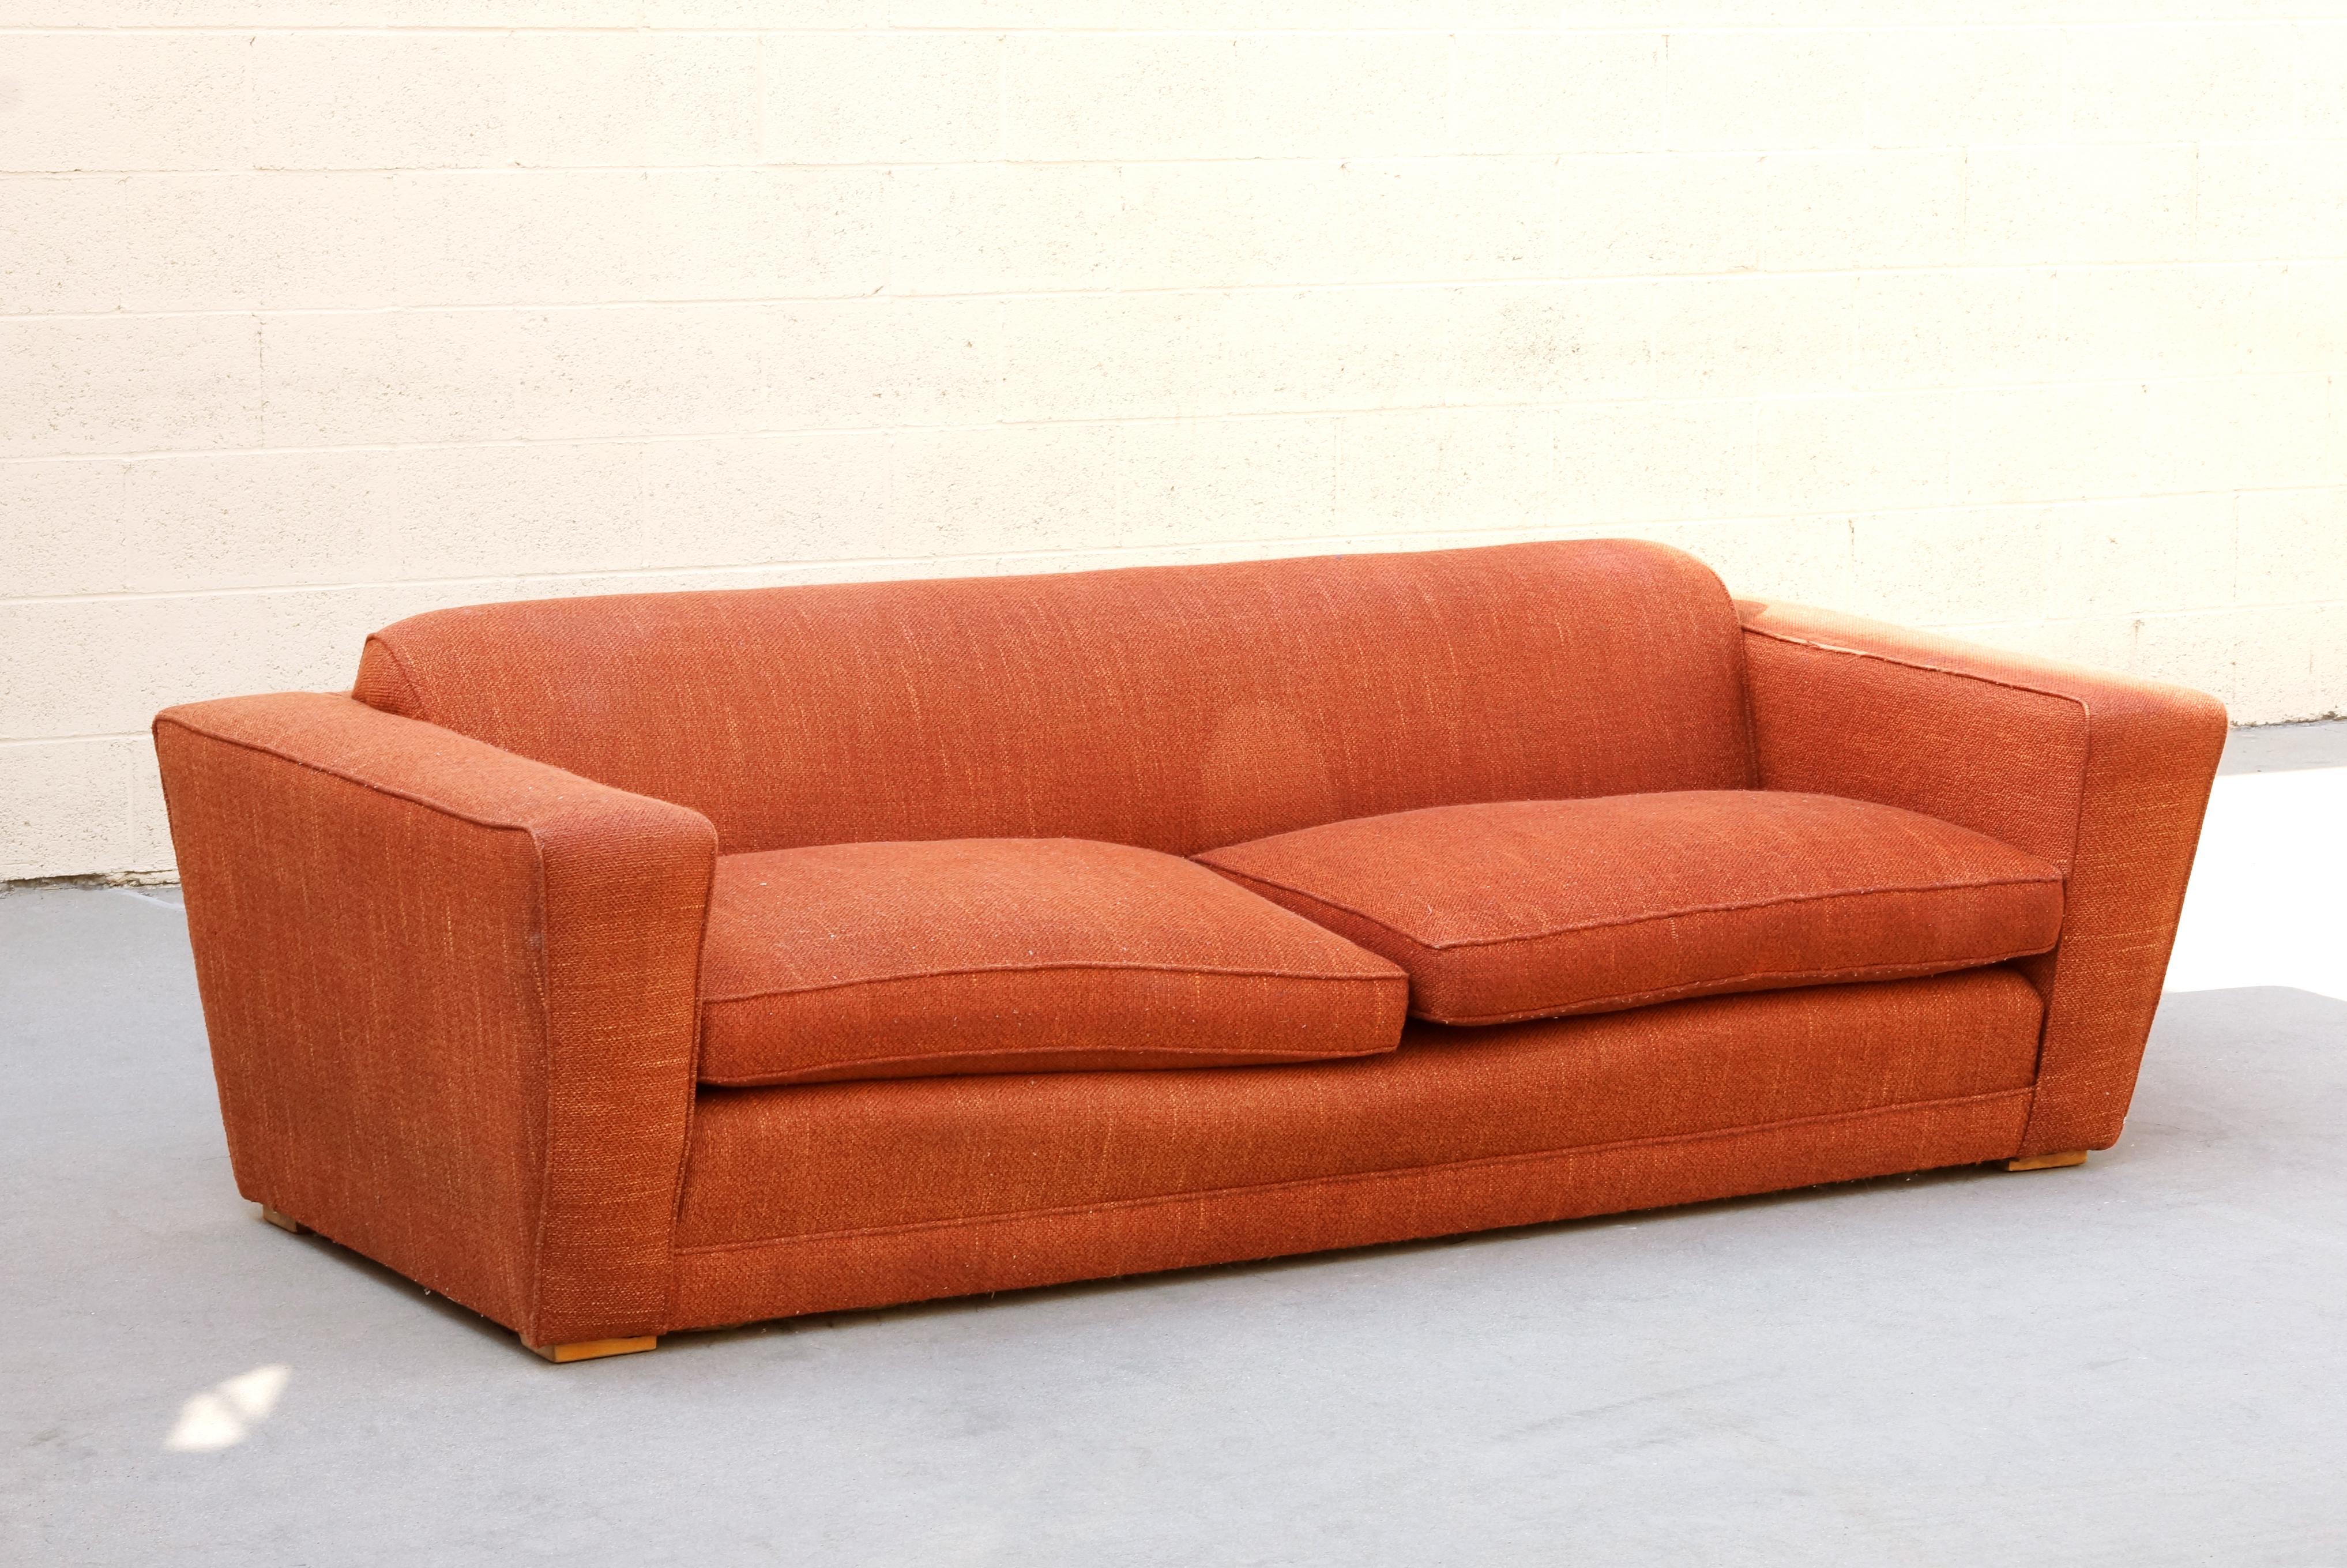 Rare Art Deco club / speed sofa by acclaimed Art Deco designer Paul Frankl. Iconic streamline design. Structurally in very good condition. Original orange tweed upholstery shows wear as pictured. Sold as is. 

Dimensions: 86